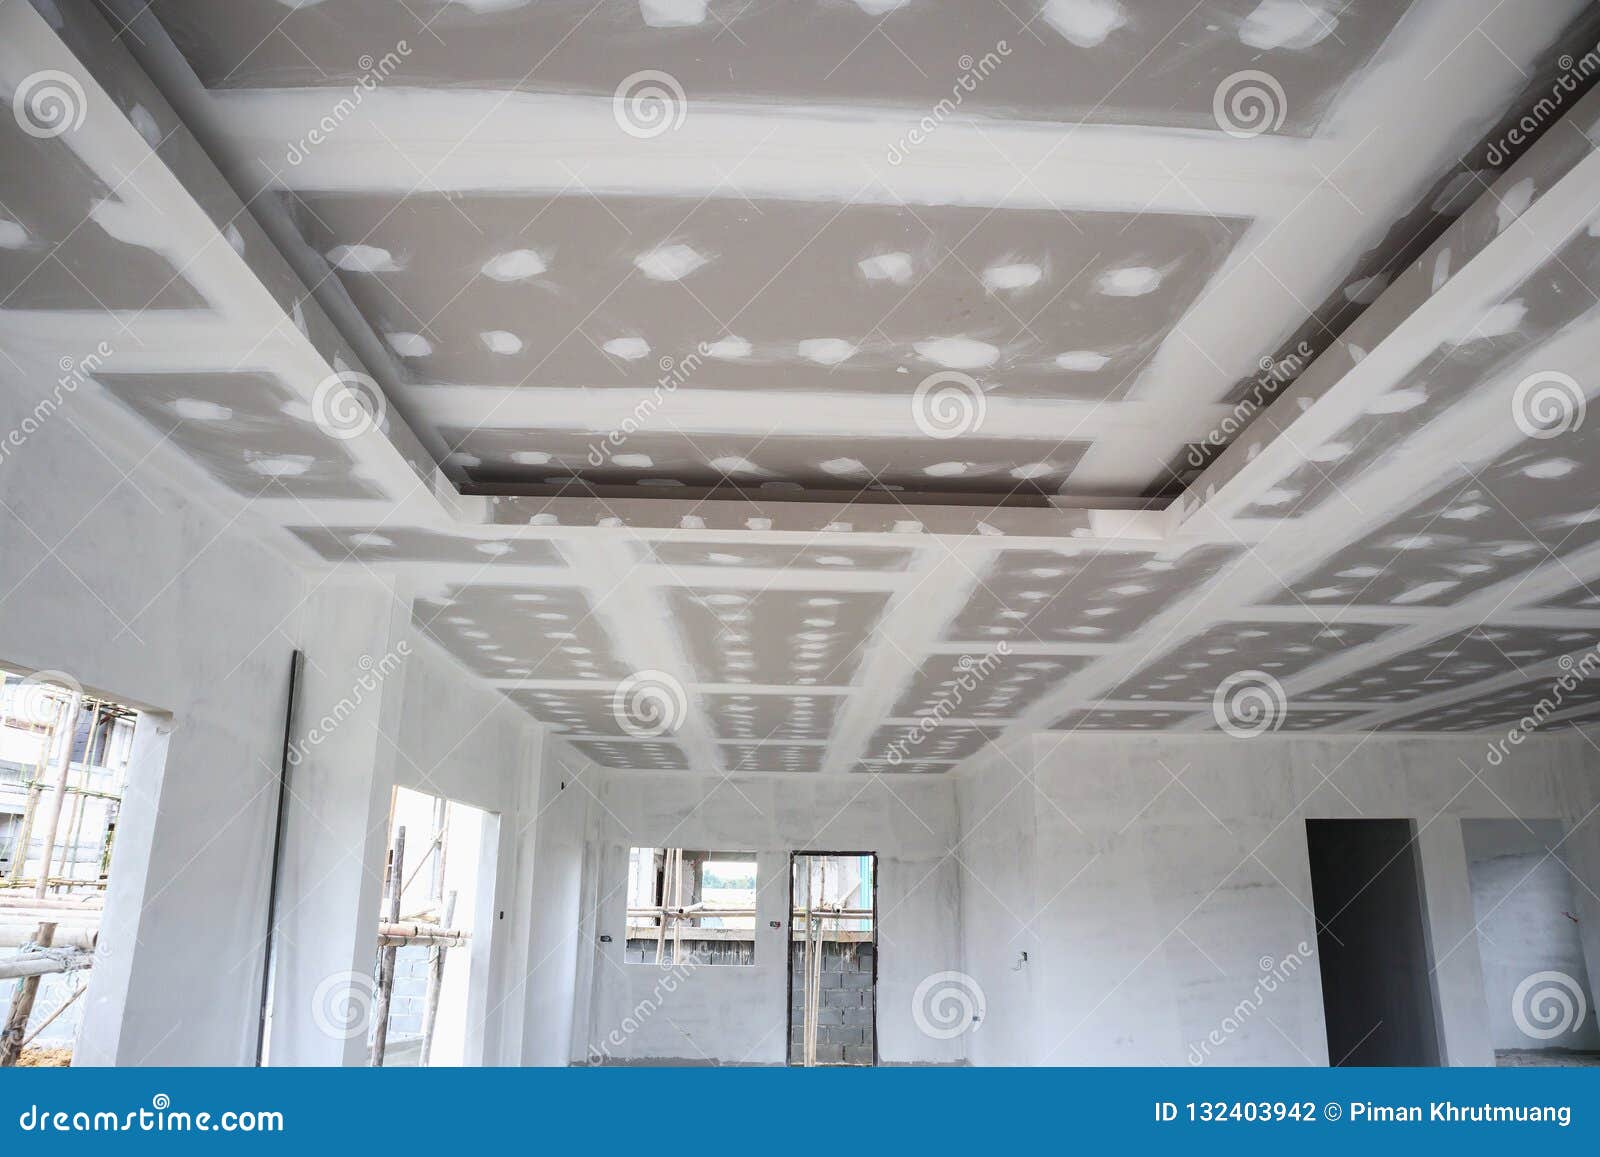 Ceiling Gypsum Board Installation At Construction Site Stock